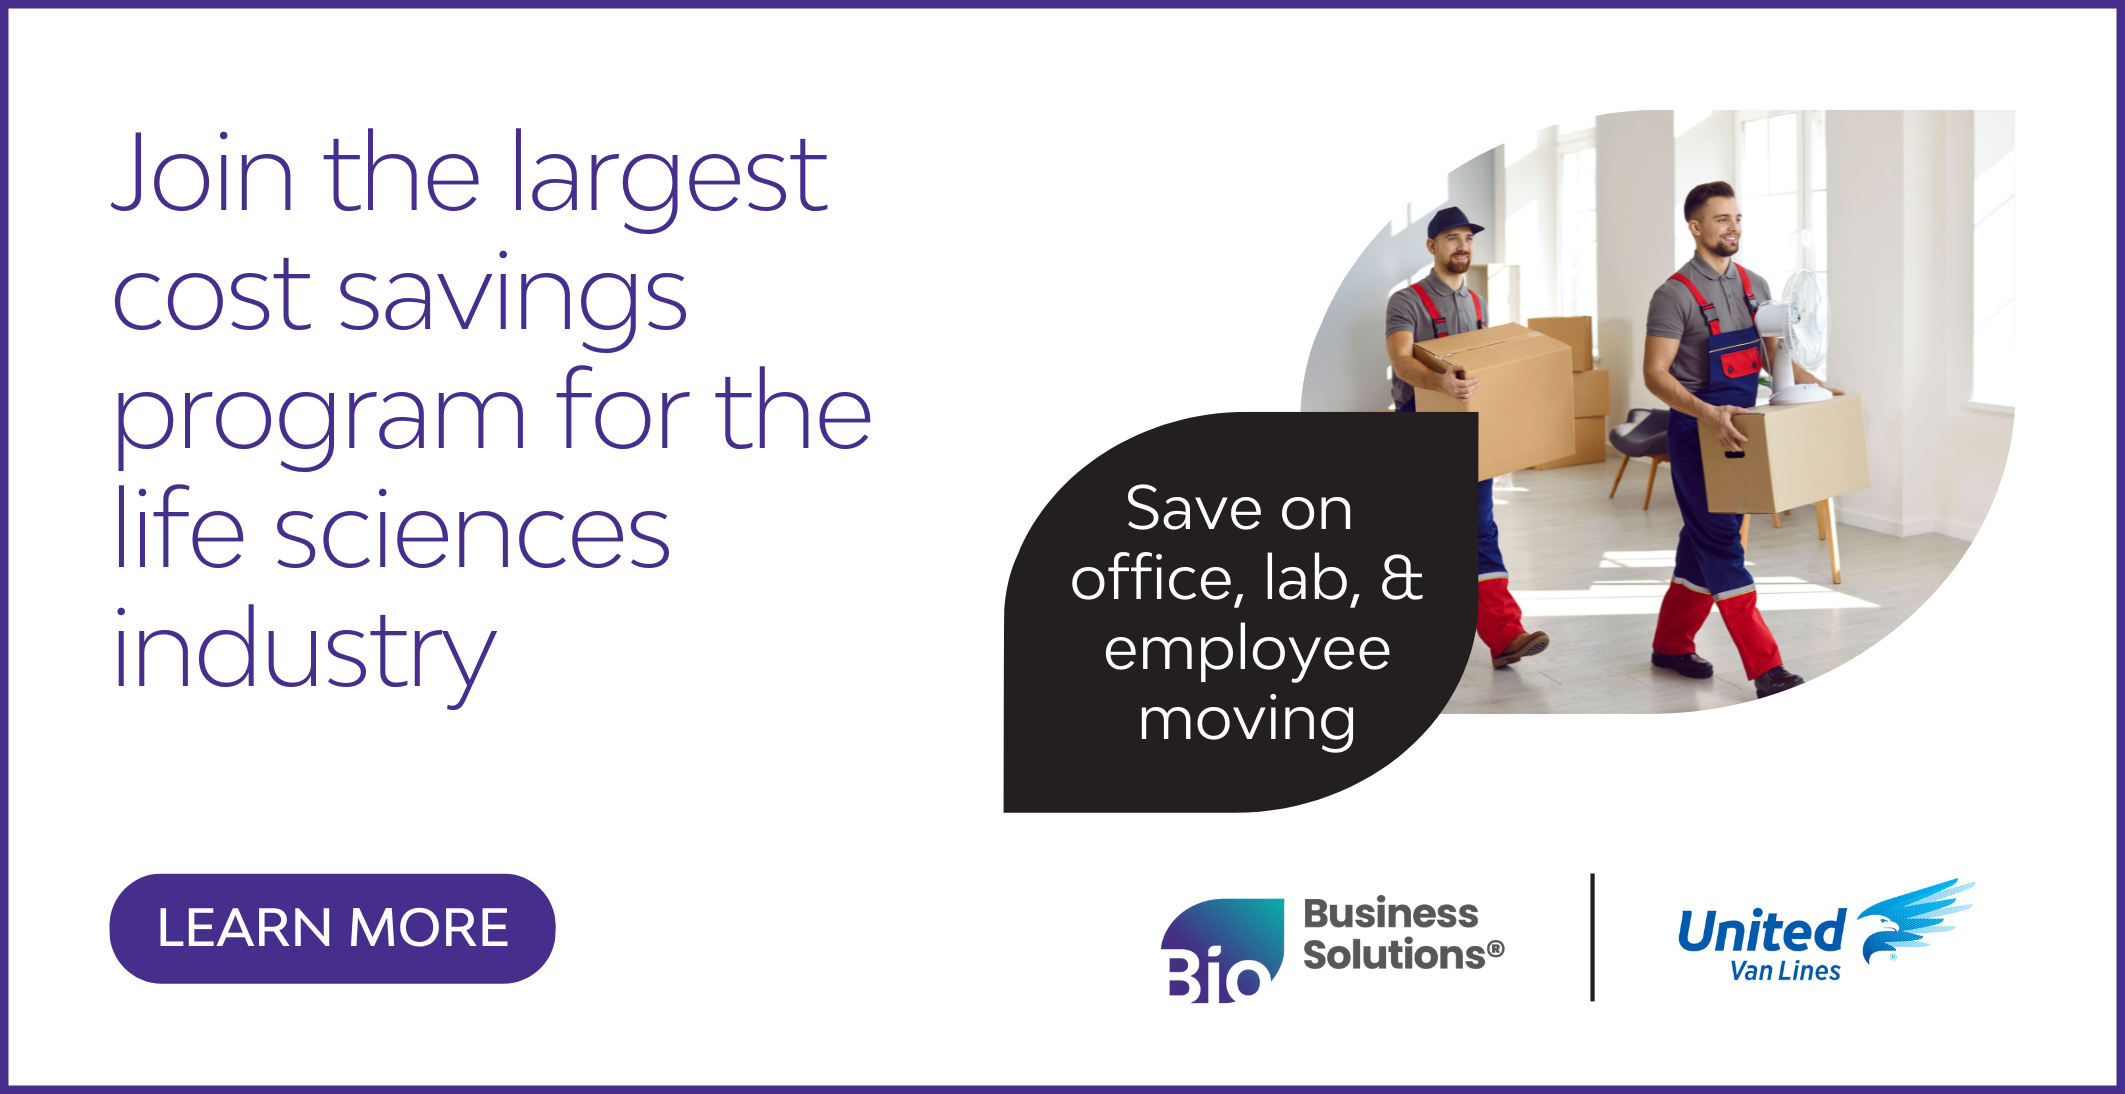 Click to save on office, lab, and employee moving.